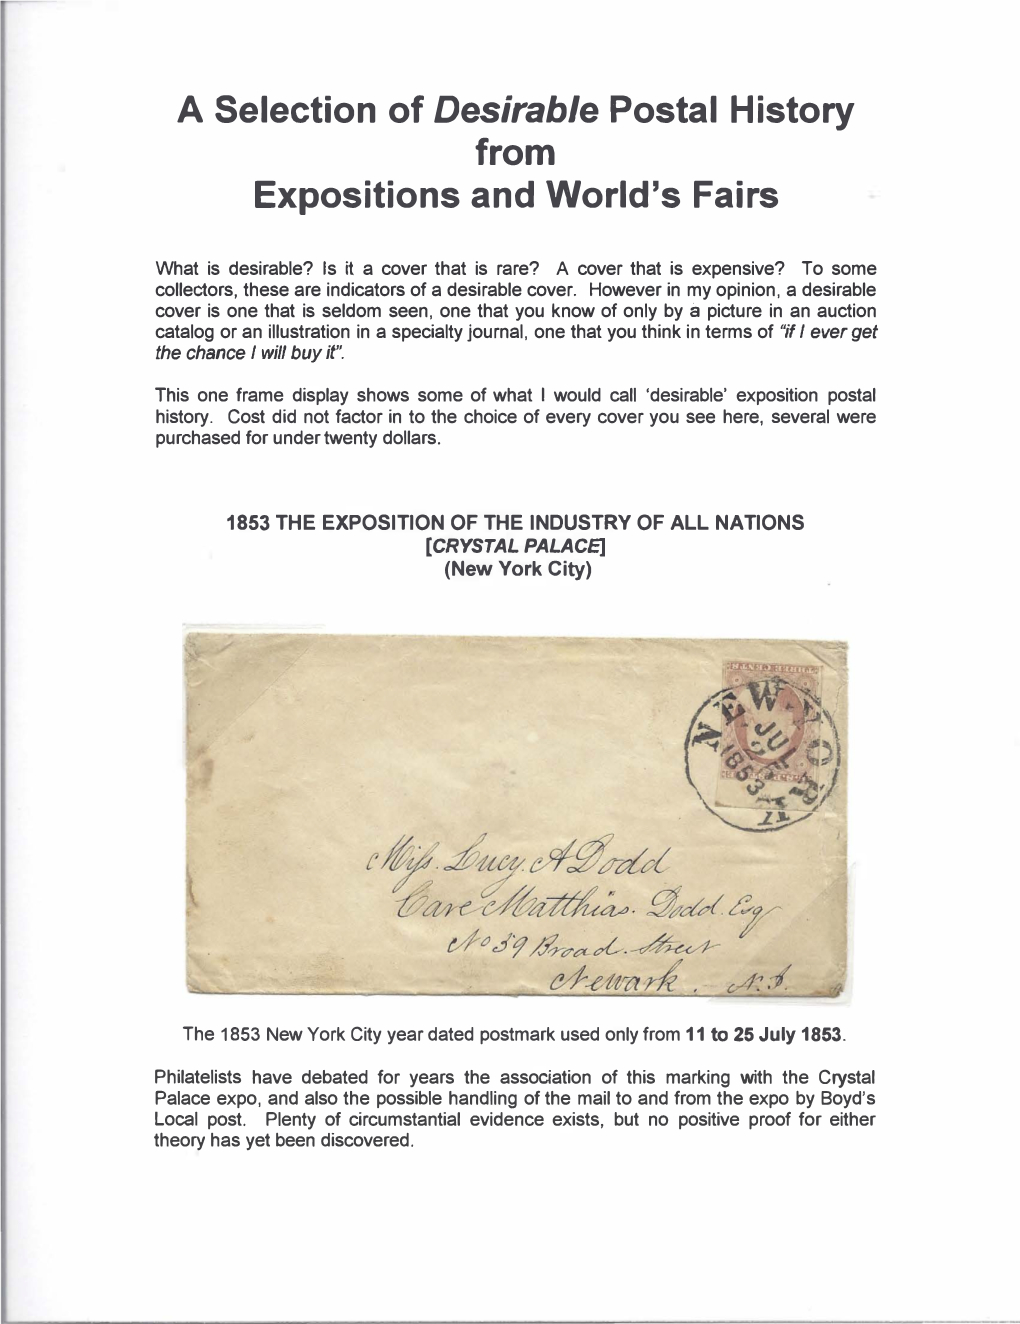 A Selection of Desirable Postal History from Expositions and World's Fairs